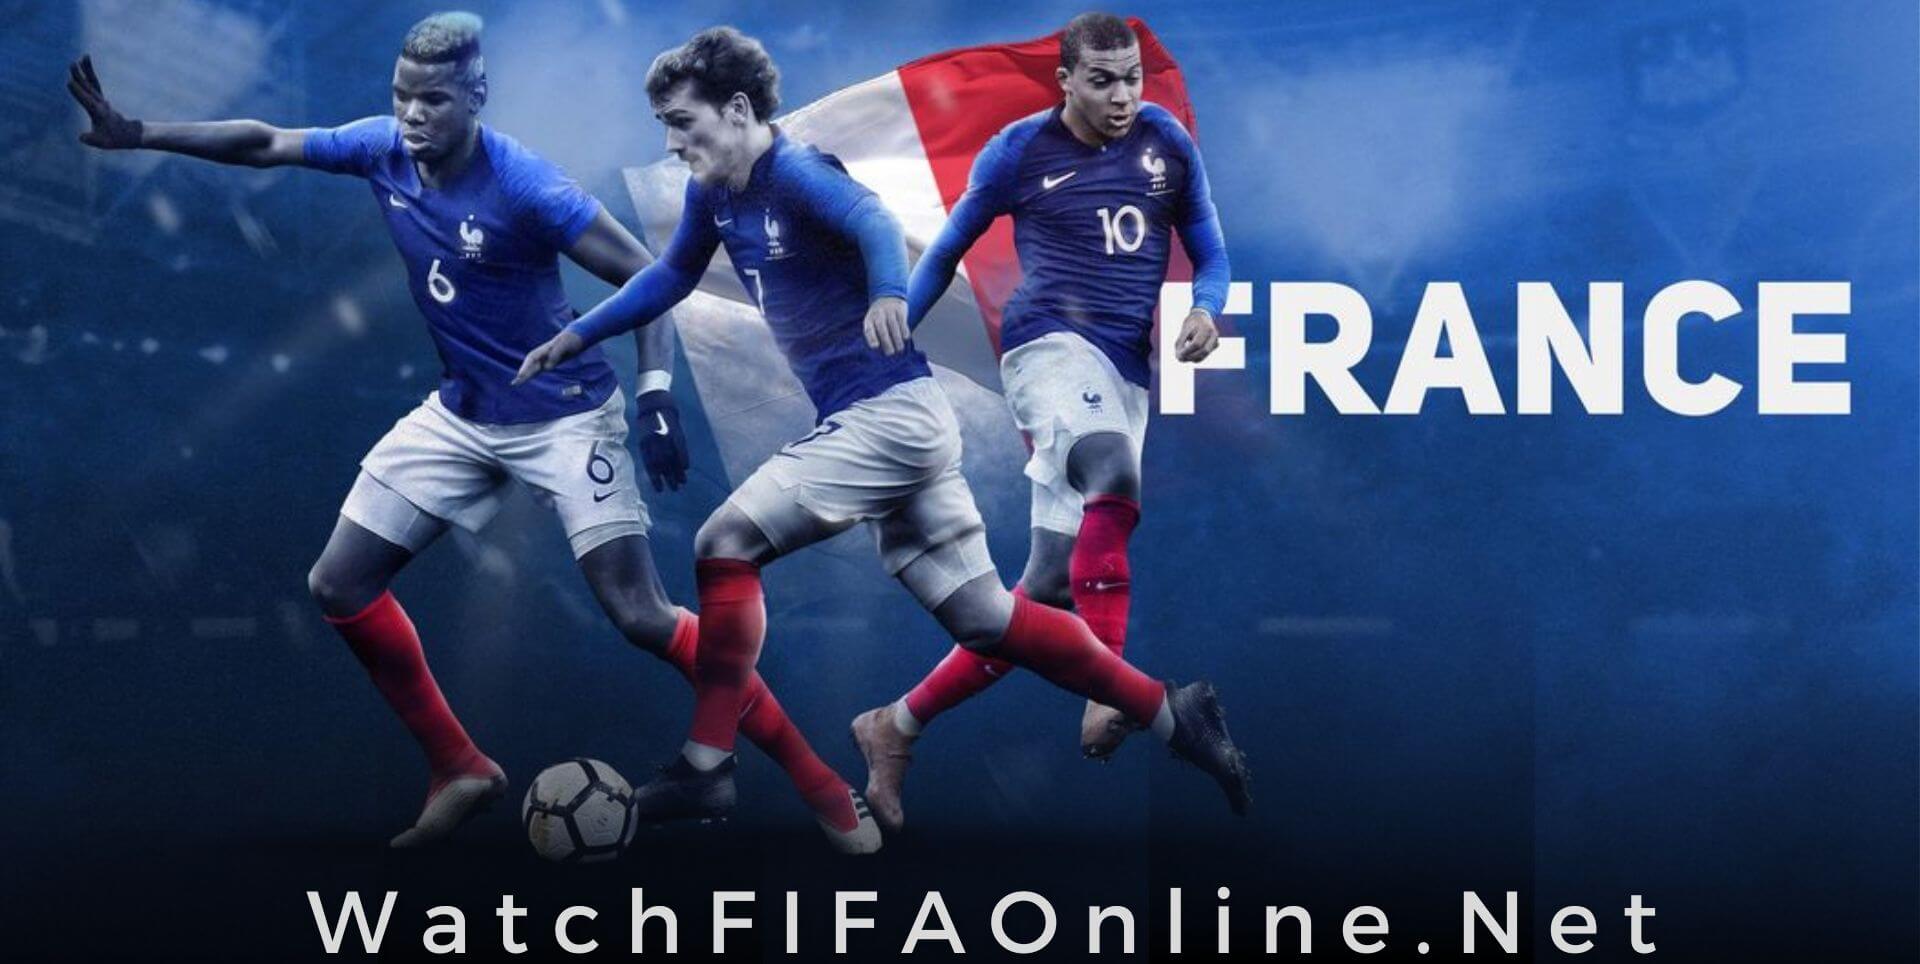 france-team-matches-fifa-world-cup-stream